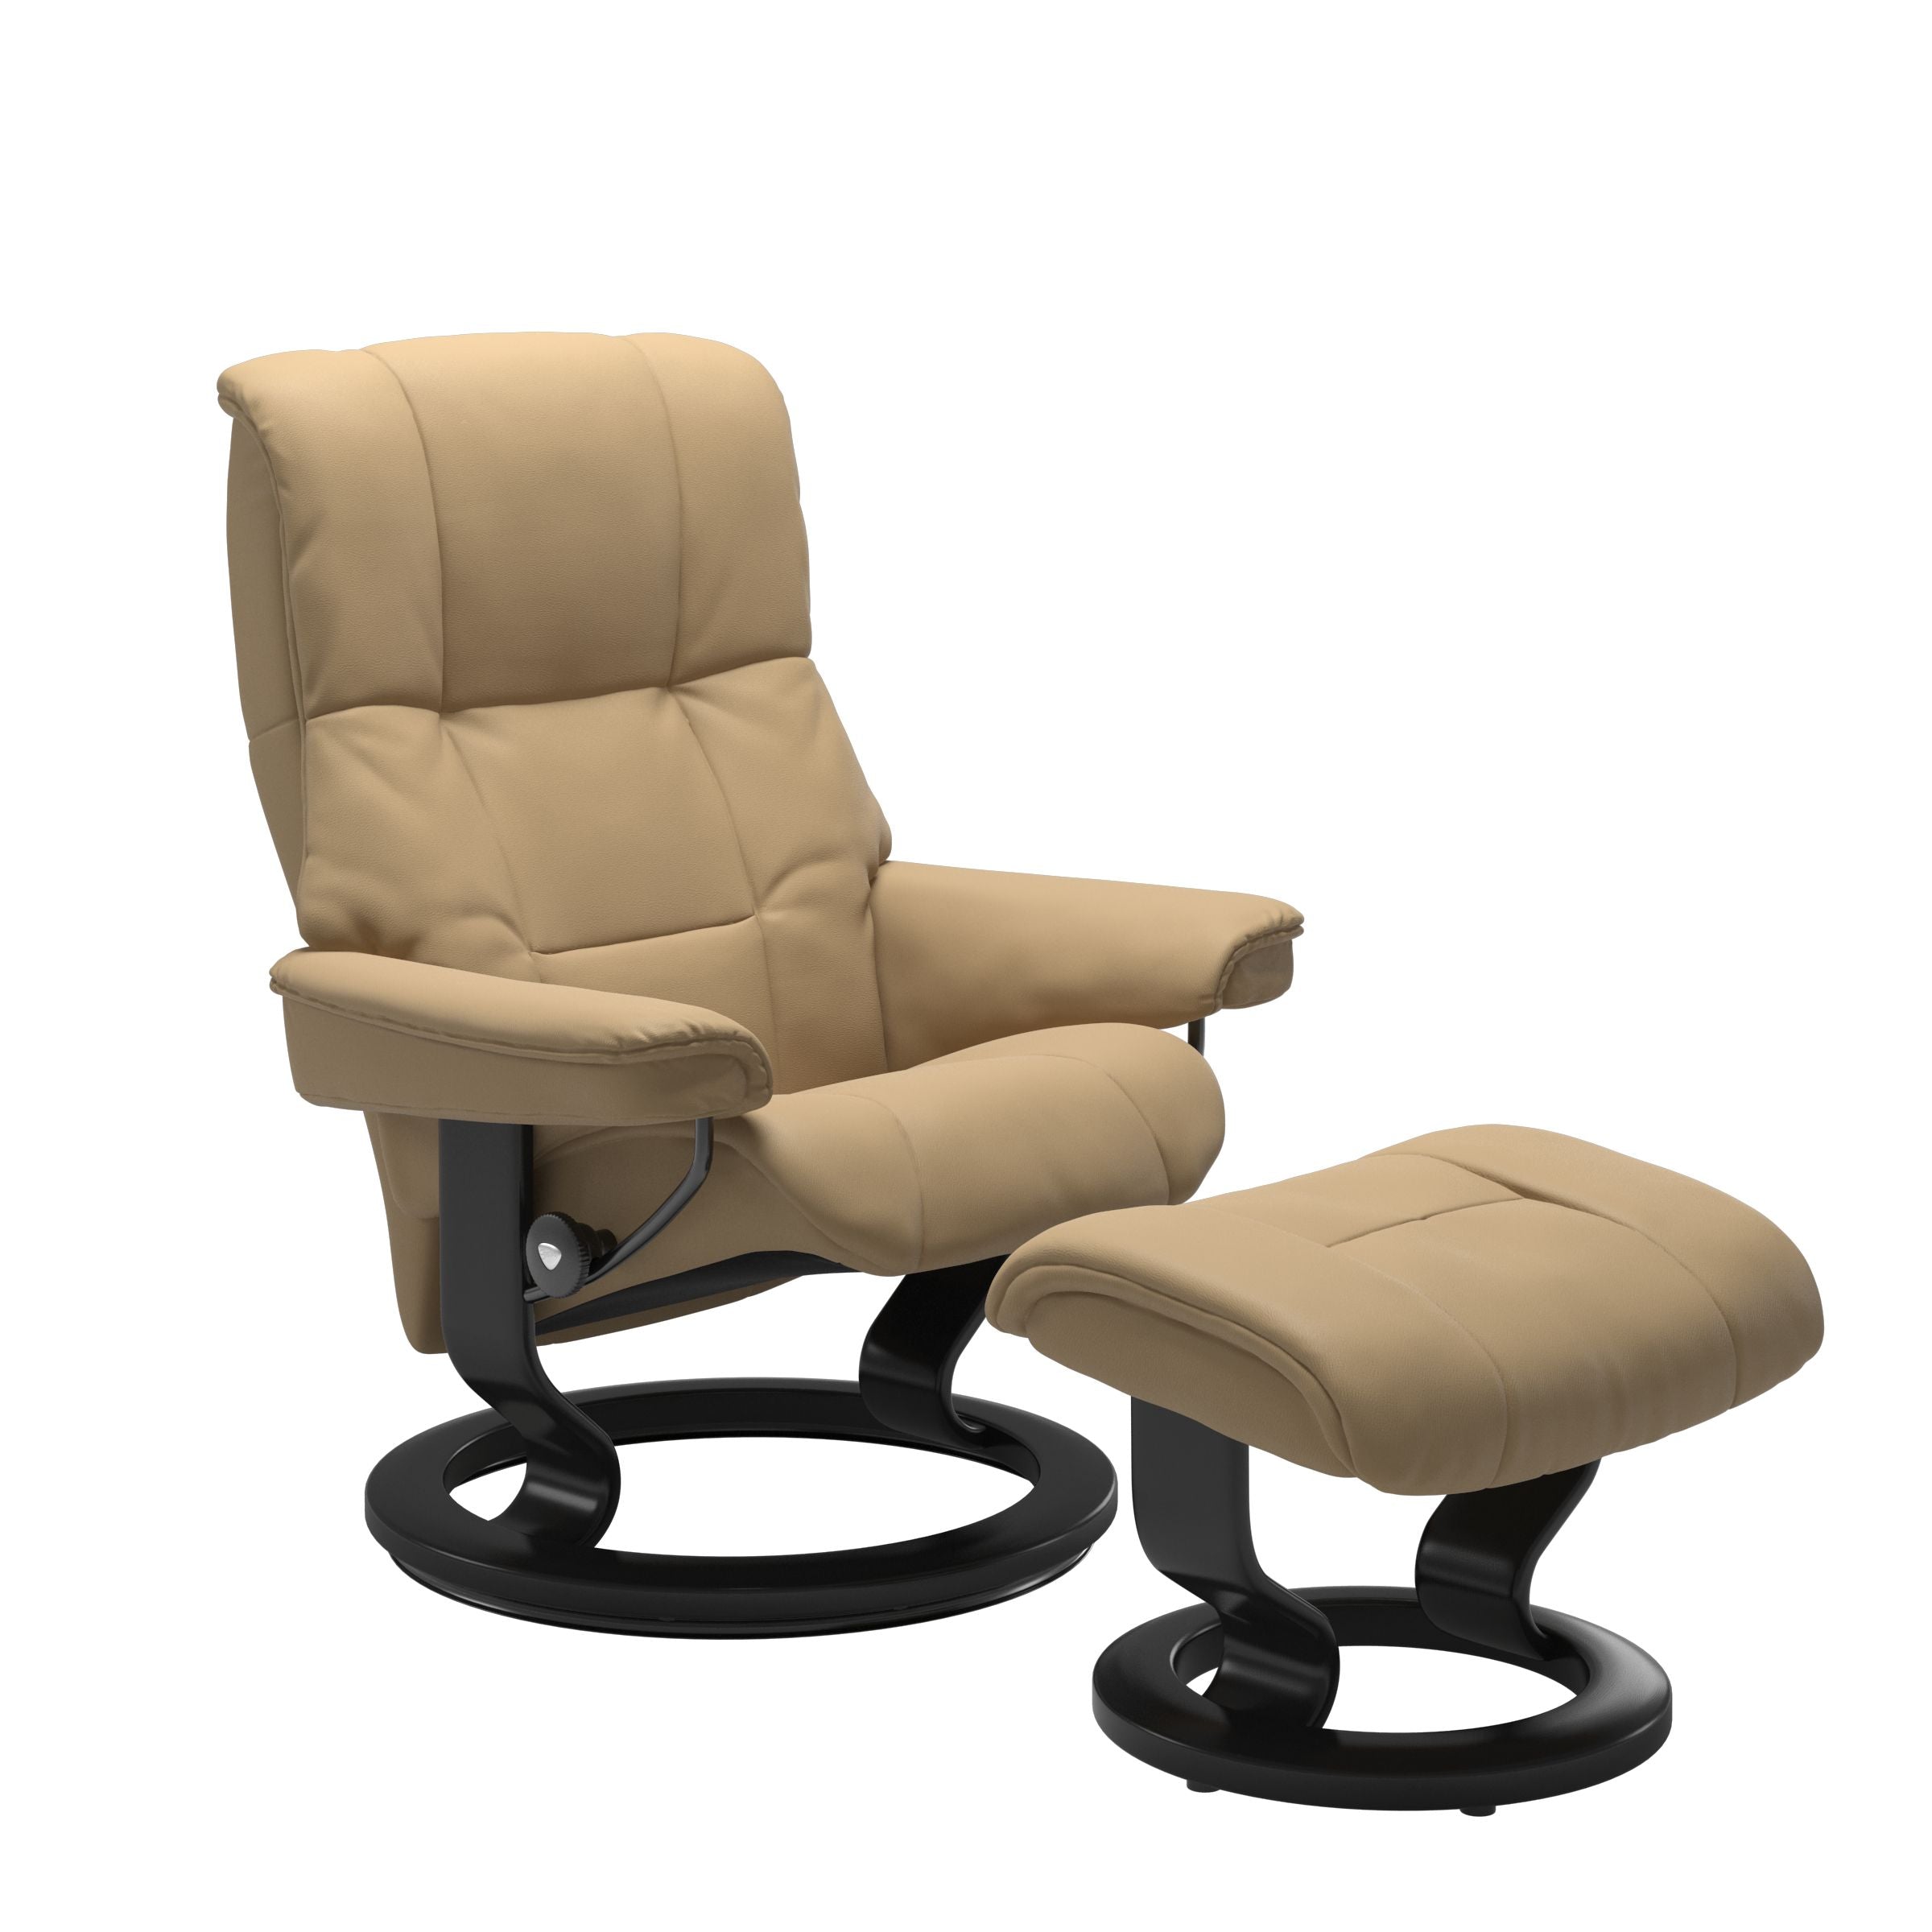 Stressless Mayfair Large Recliner and Ottoman with Classic Base